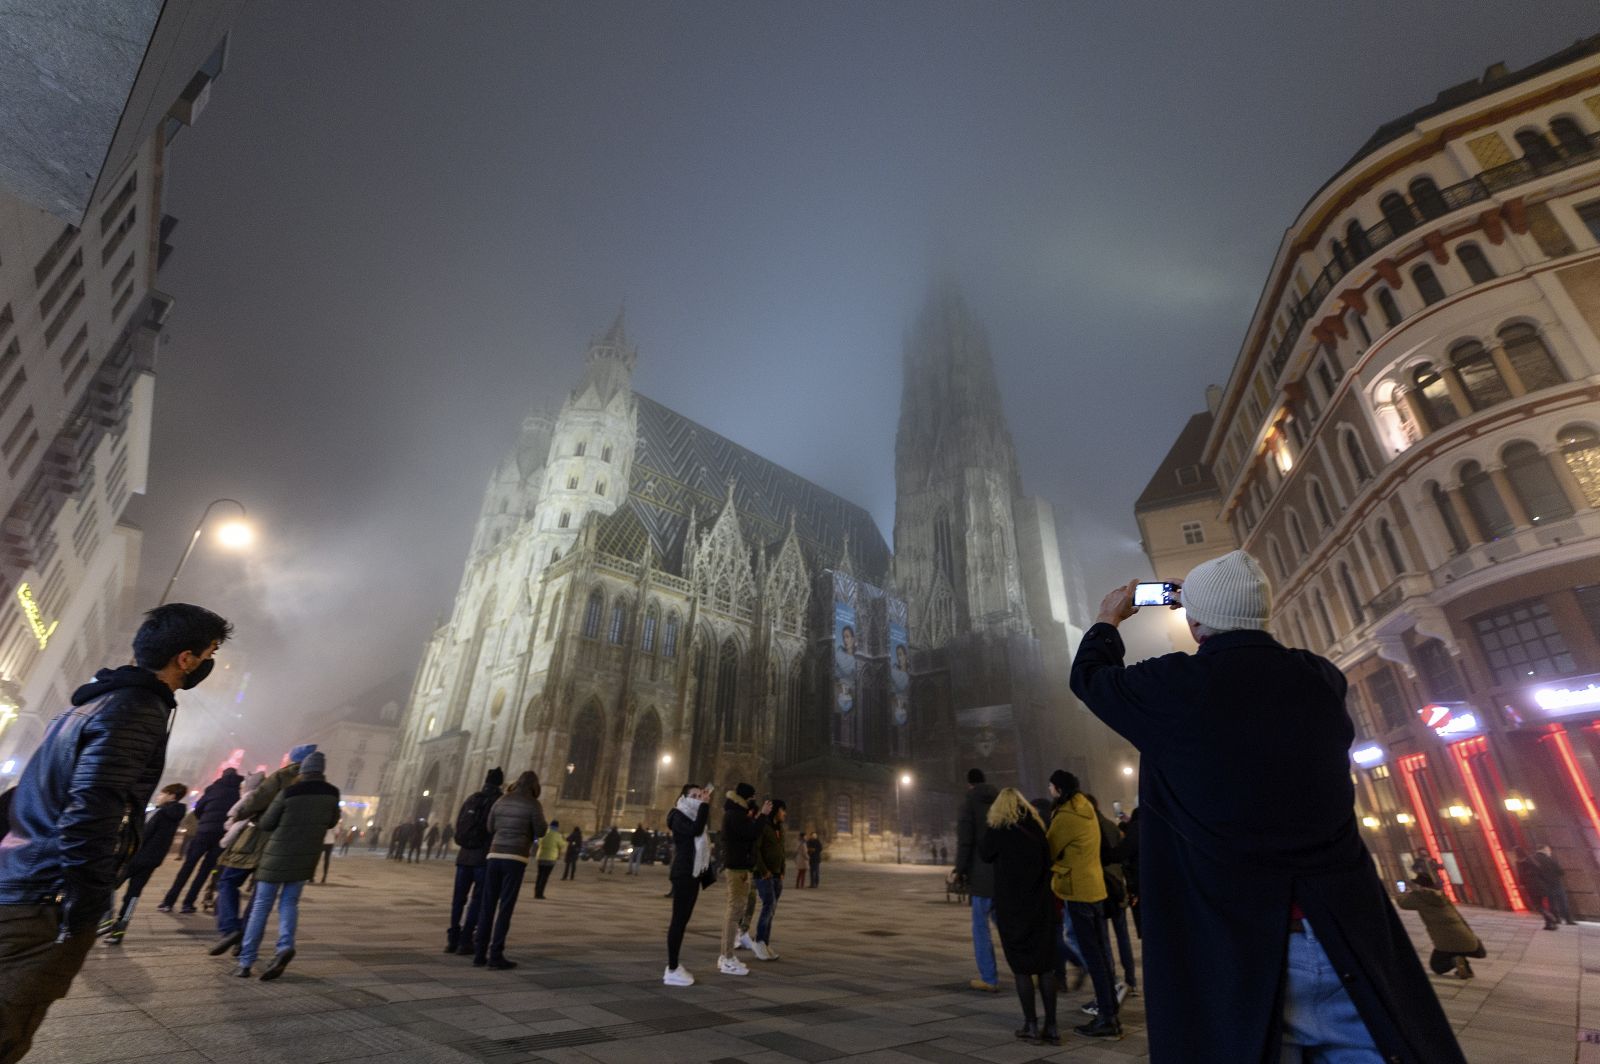 epa08913433 People gather to celebrate the New Year’s Eve at the Stephansplatz square in front of the Saint Stephen's Cathedral during a nationwide COVID-19 lockdown in Vienna, Austria, 31 December 2020.  EPA/CHRISTIAN BRUNA